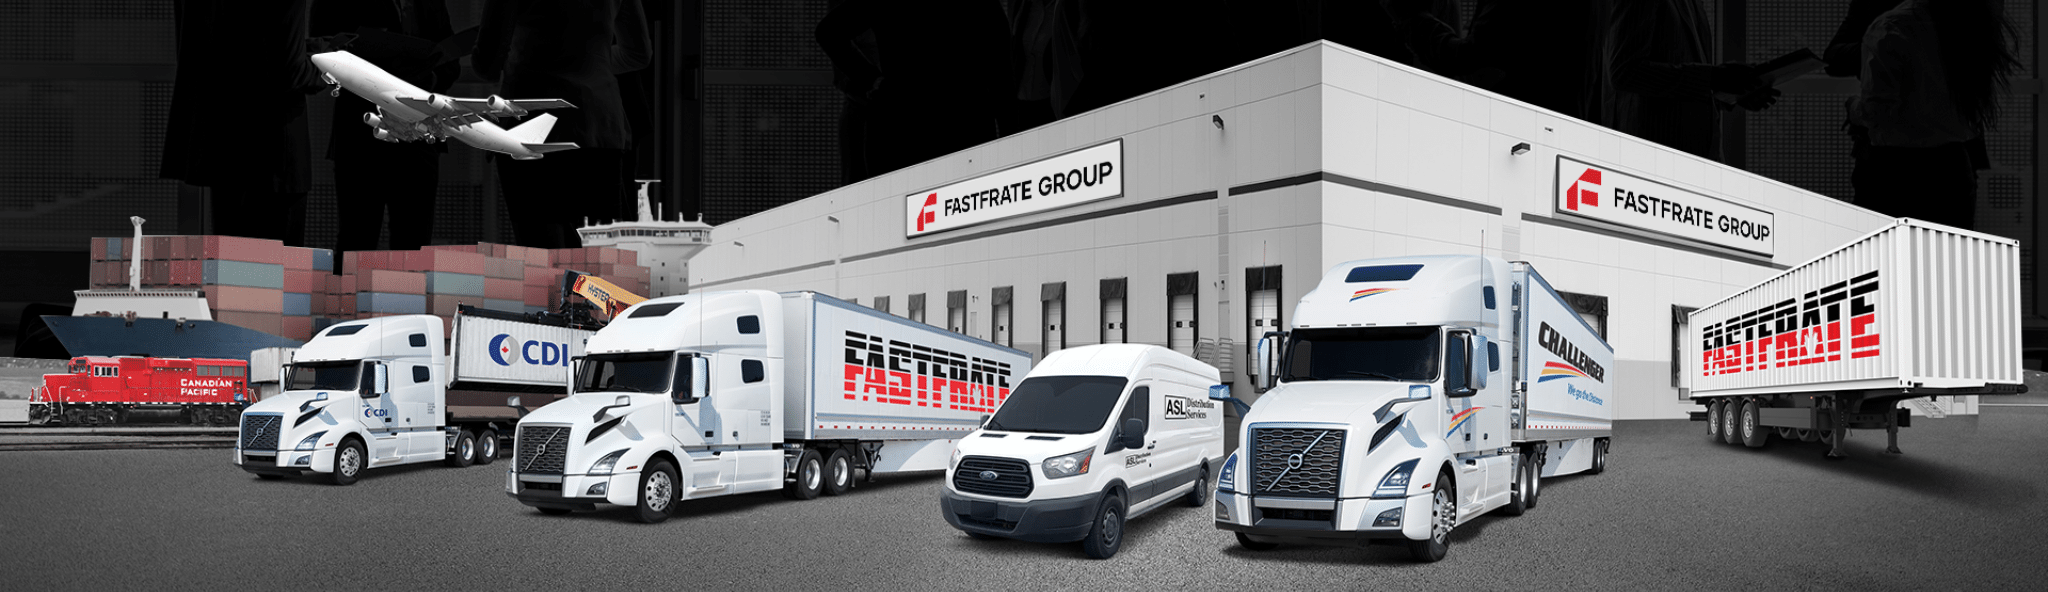 Fastfrate group trucks in front of a warehouse